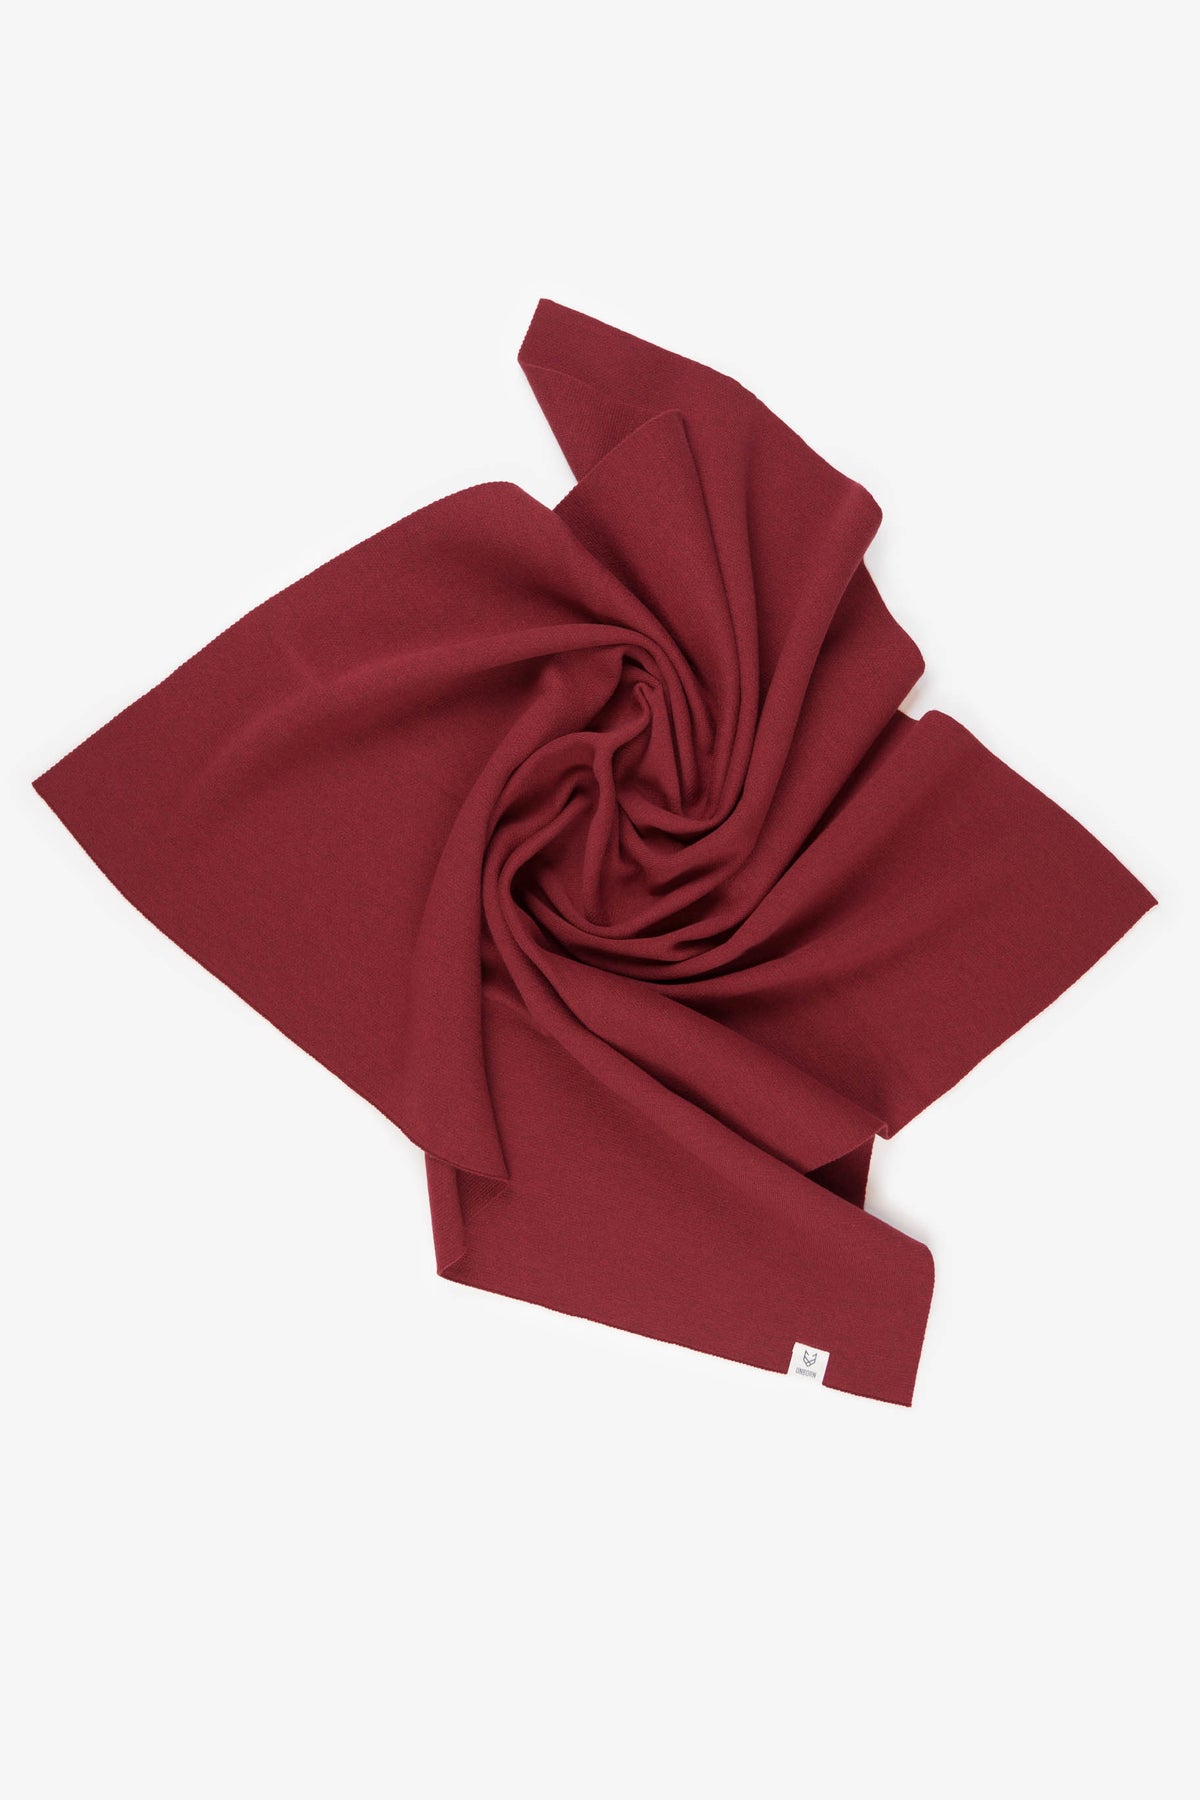 The Merino Wool Square Scarf Brick Red, open flat - Unborn